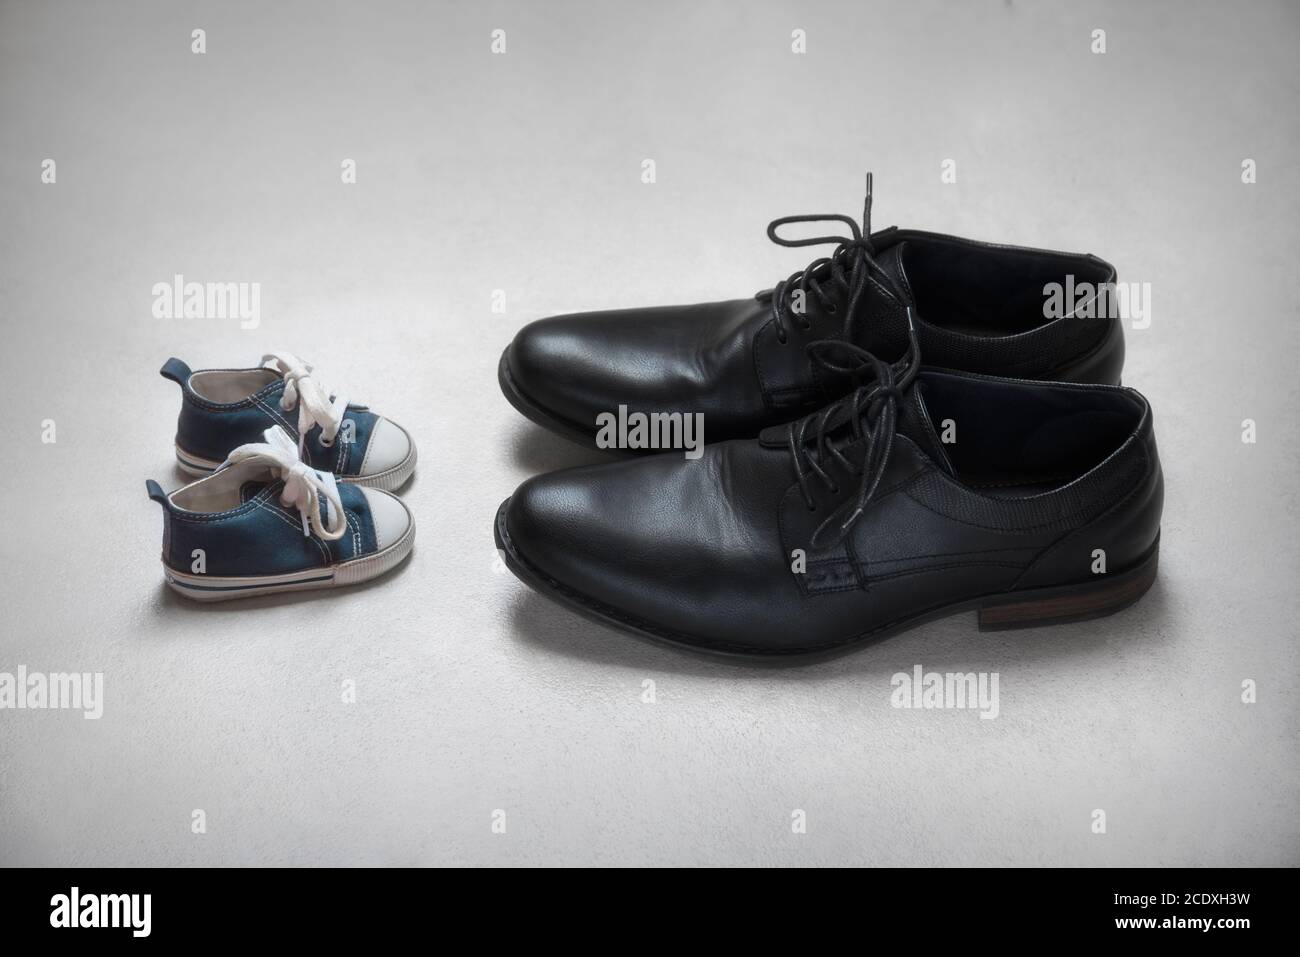 Father with son Metaphor, baby and adult shoes Stock Photo